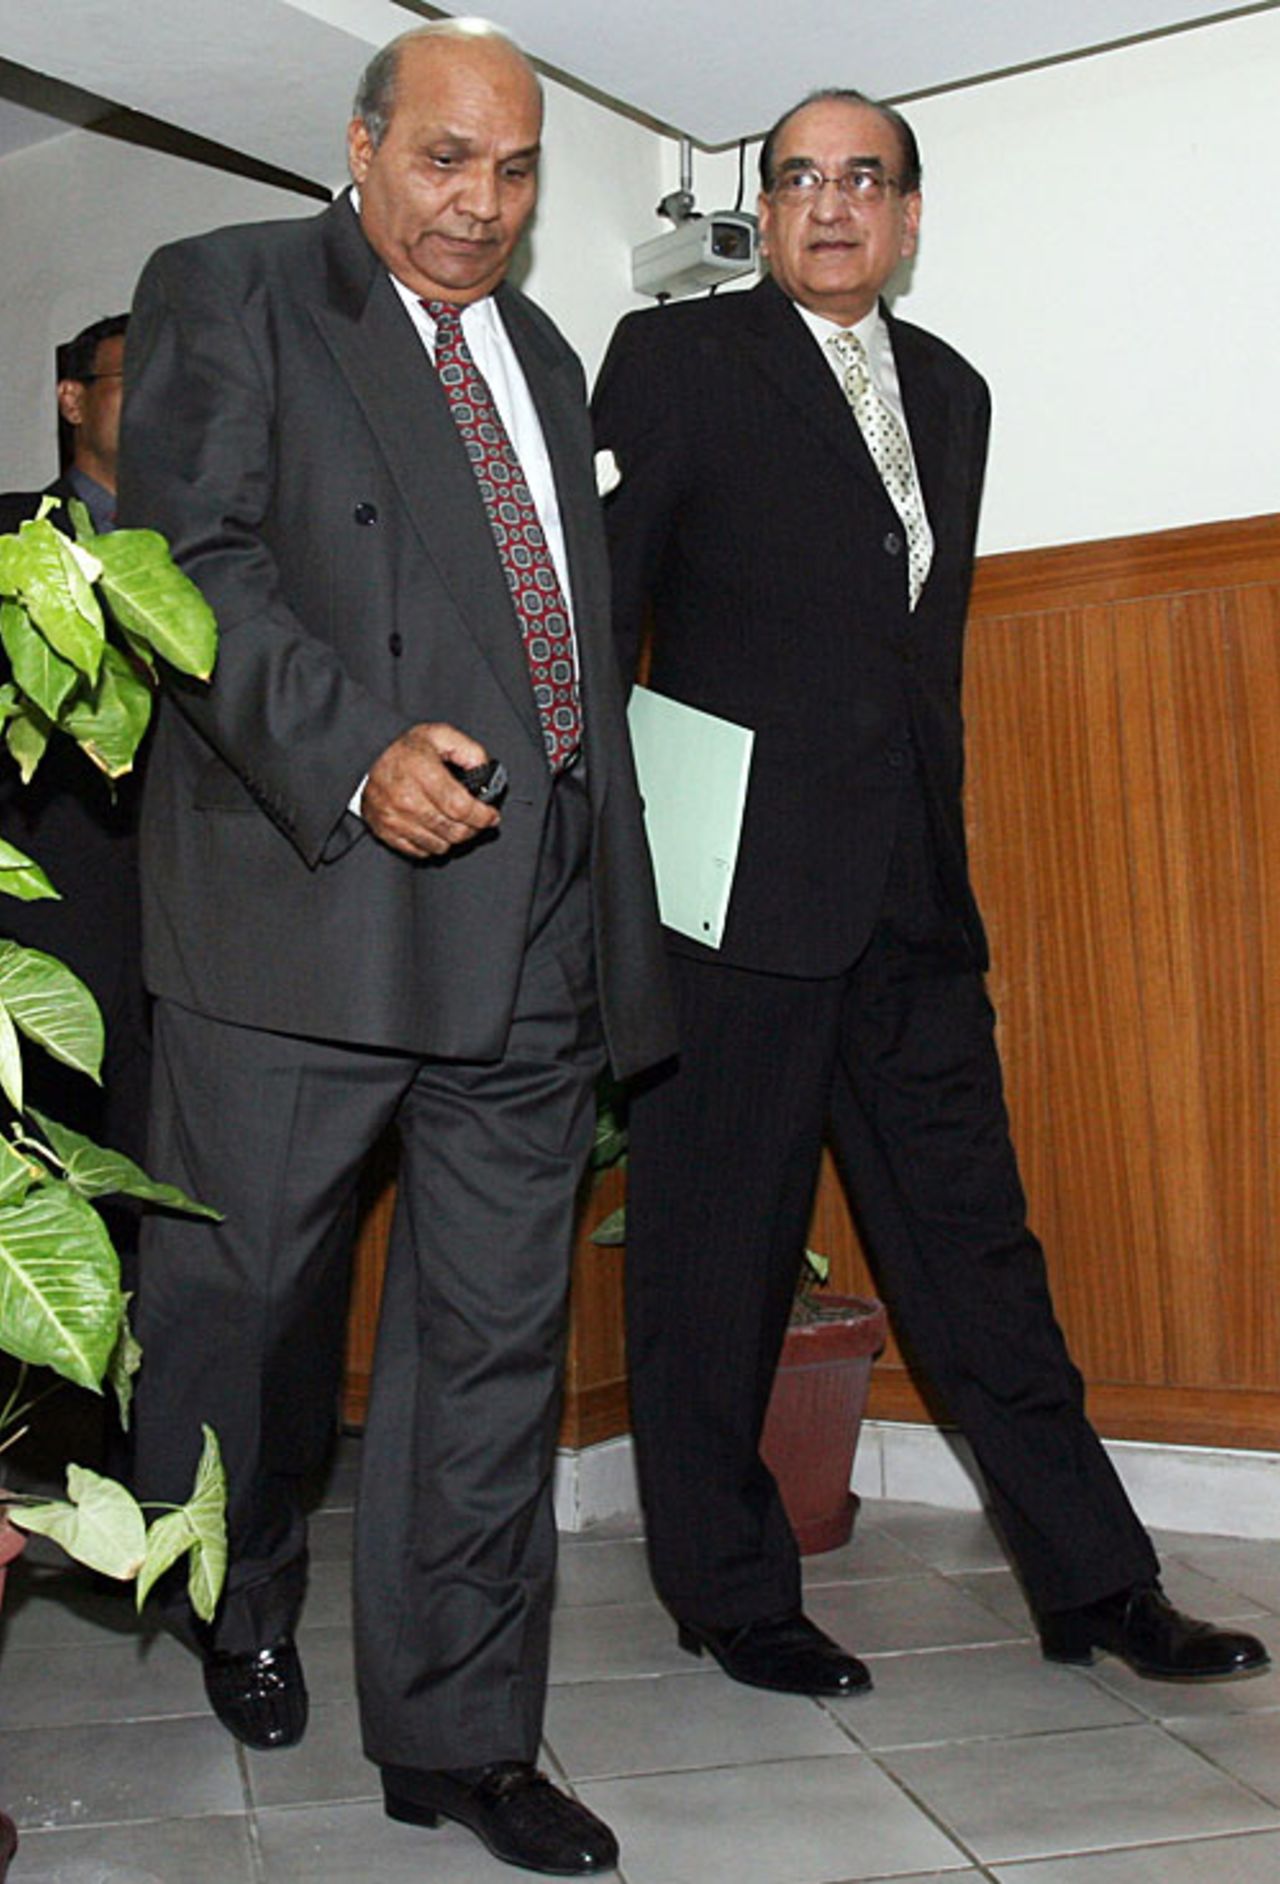 Intikhab Alam and Shahid Hamid, the head of Pakistan's anti-doping tribunal, arrive for a press conference, Lahore, November 2, 2006